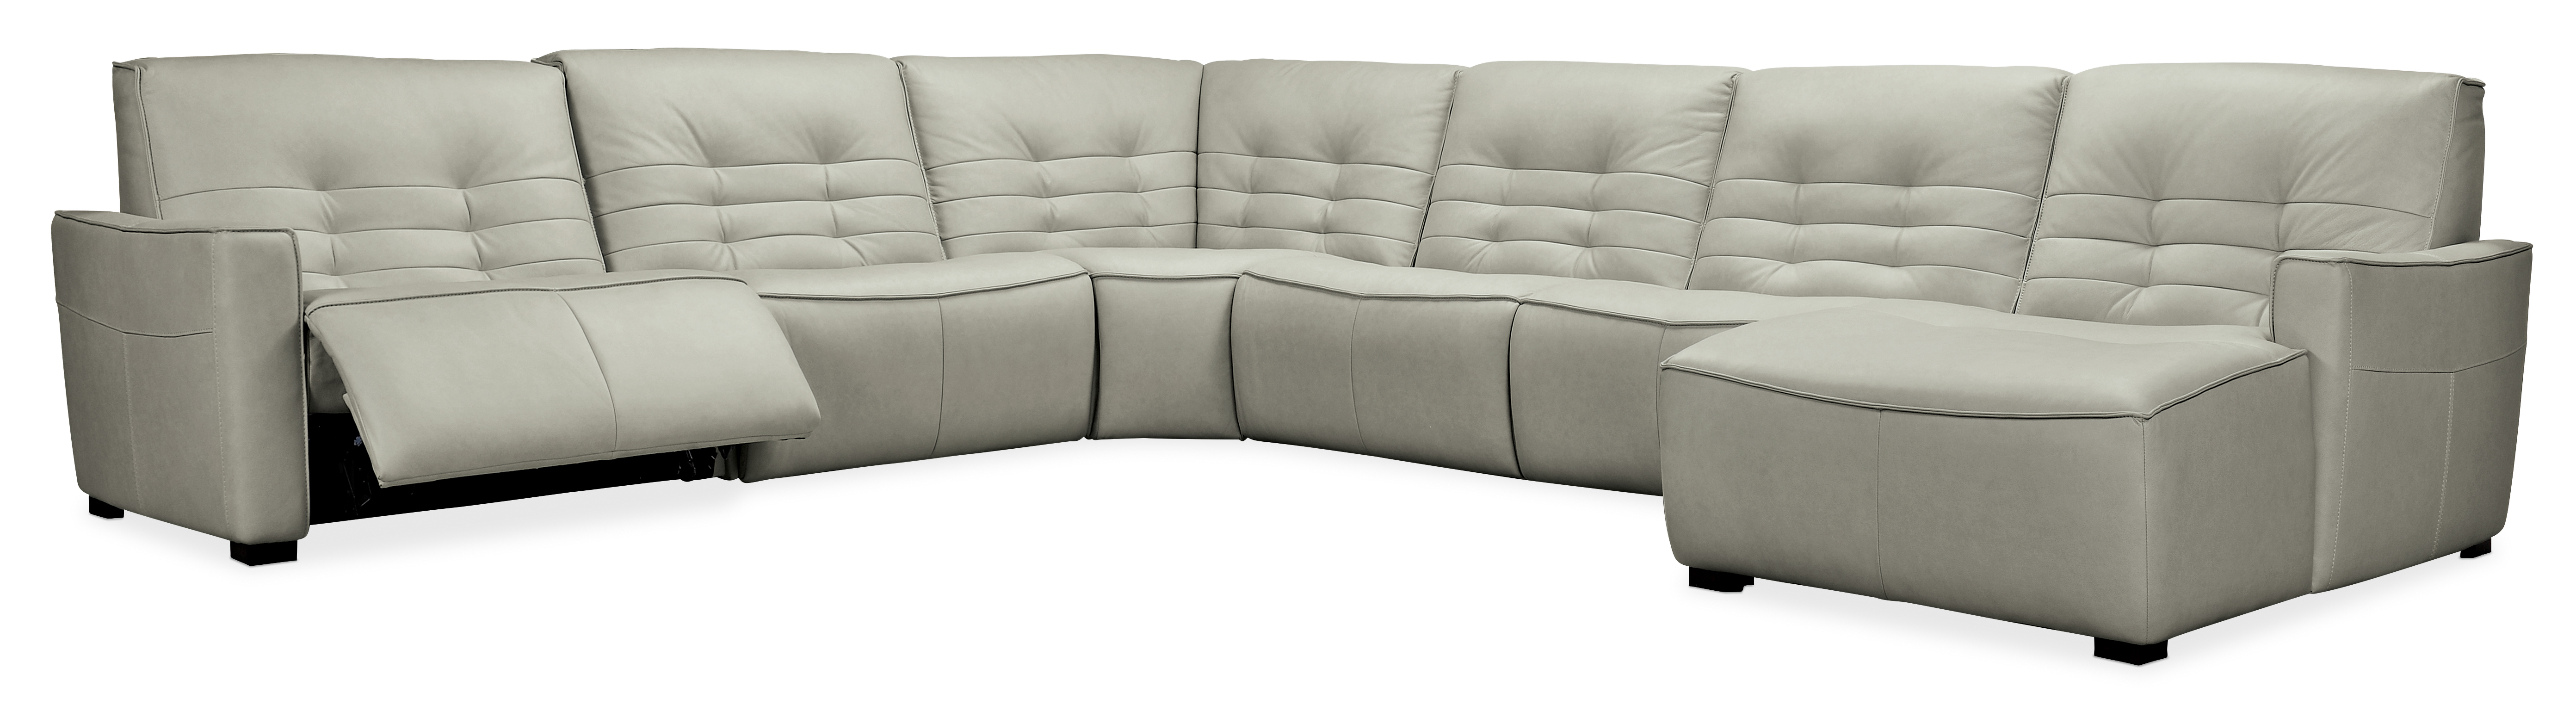 Picture of Reaux 6-Piece RAF Chaise Sectional